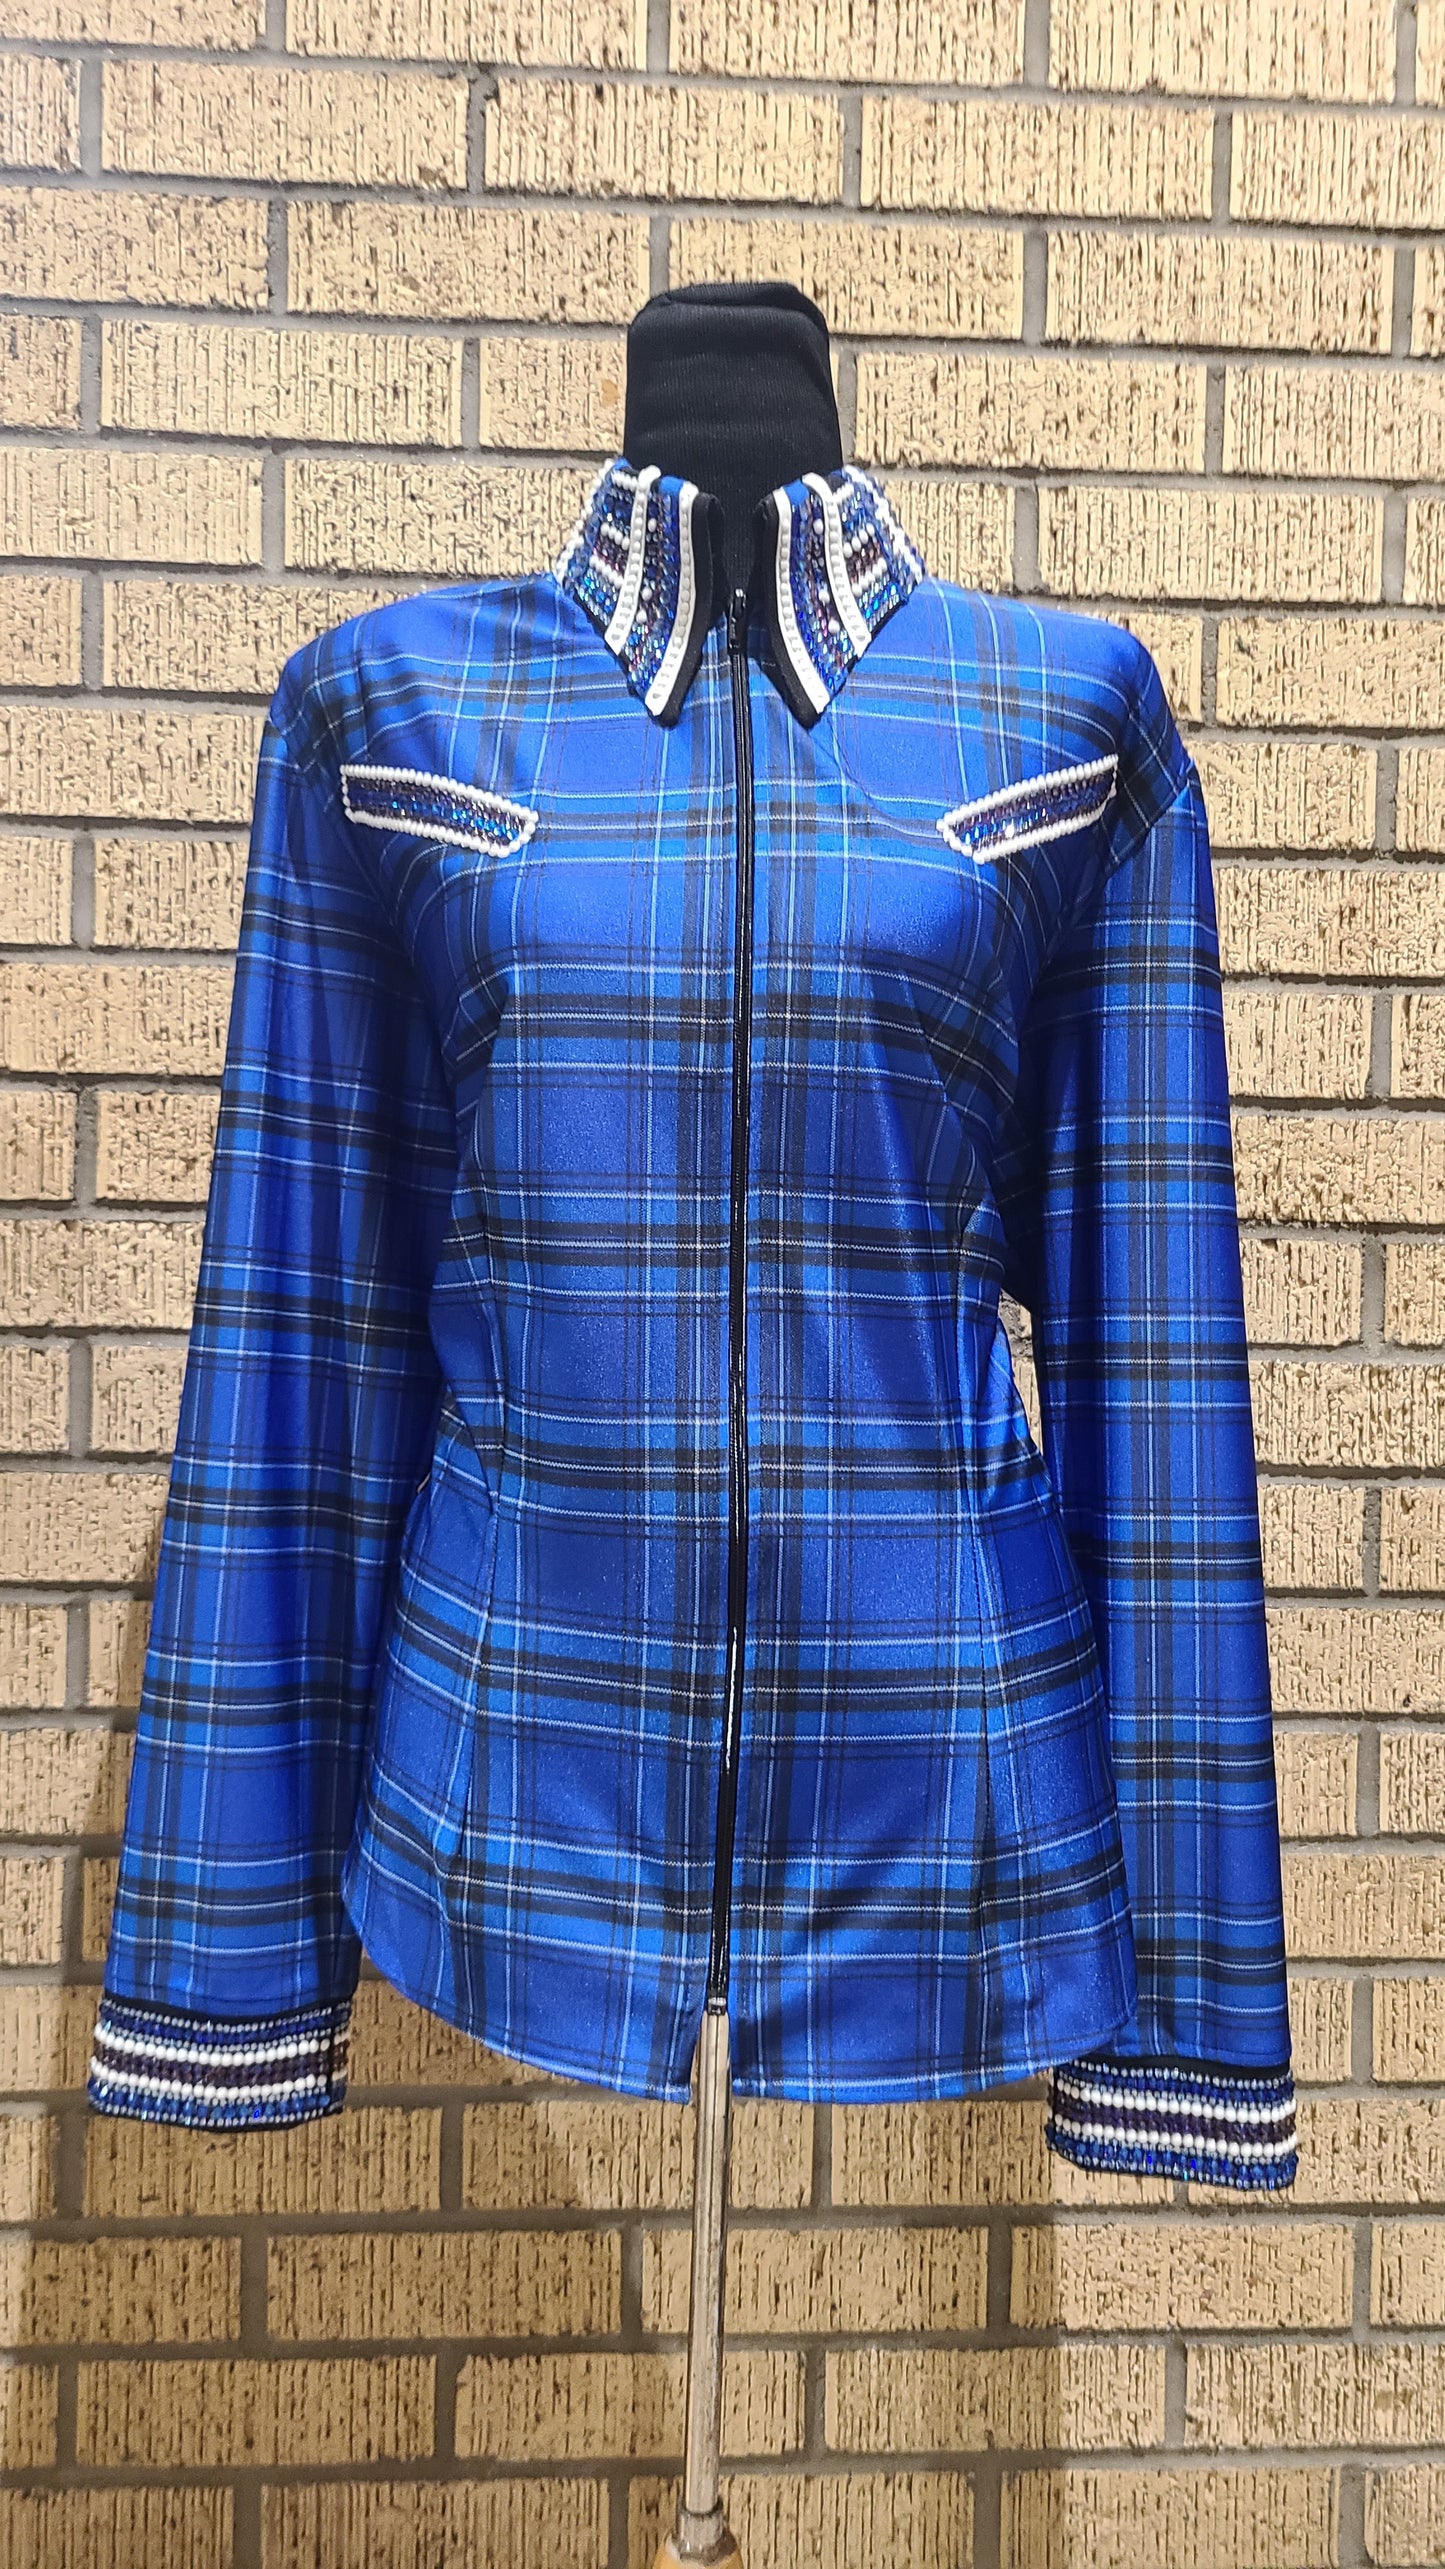 XL Blue and Black Plaid Day Shirt stretch with white